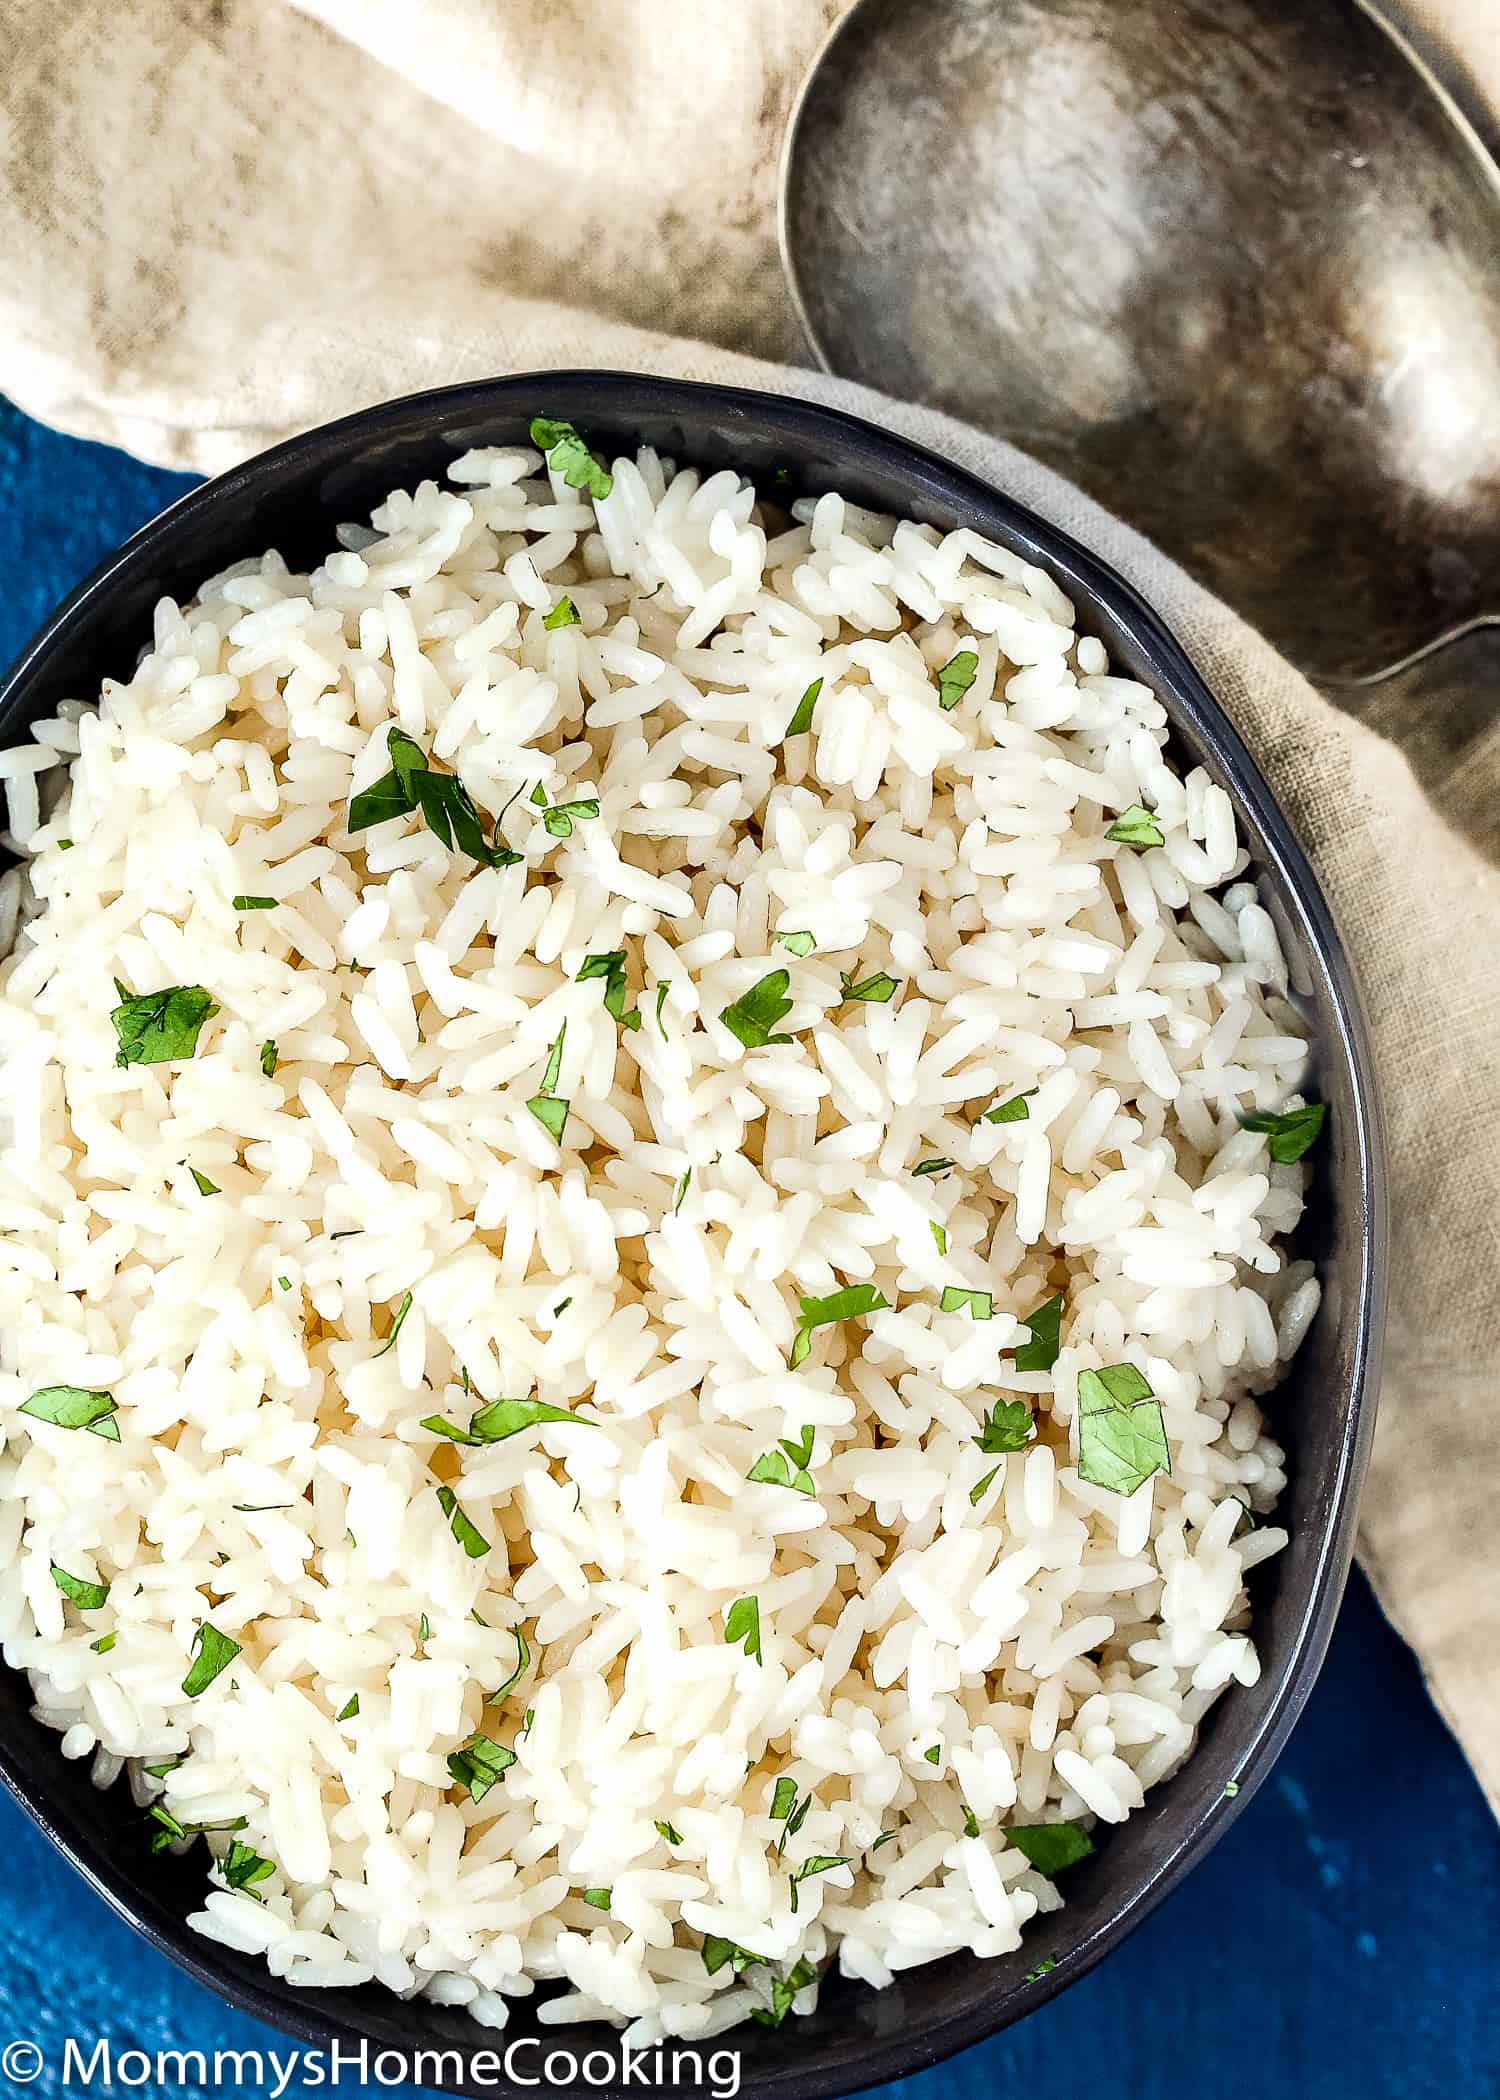 This Instant Pot Fluffy Rice is tender, light and flavorful every time! Keep reading to learn my fool-proof secret to cooking perfect rice in the Instant Pot. Ready in about 15 minutes. Guide to cook different kinds of rice in the Instant Pot is included.  https://mommyshomecooking.com